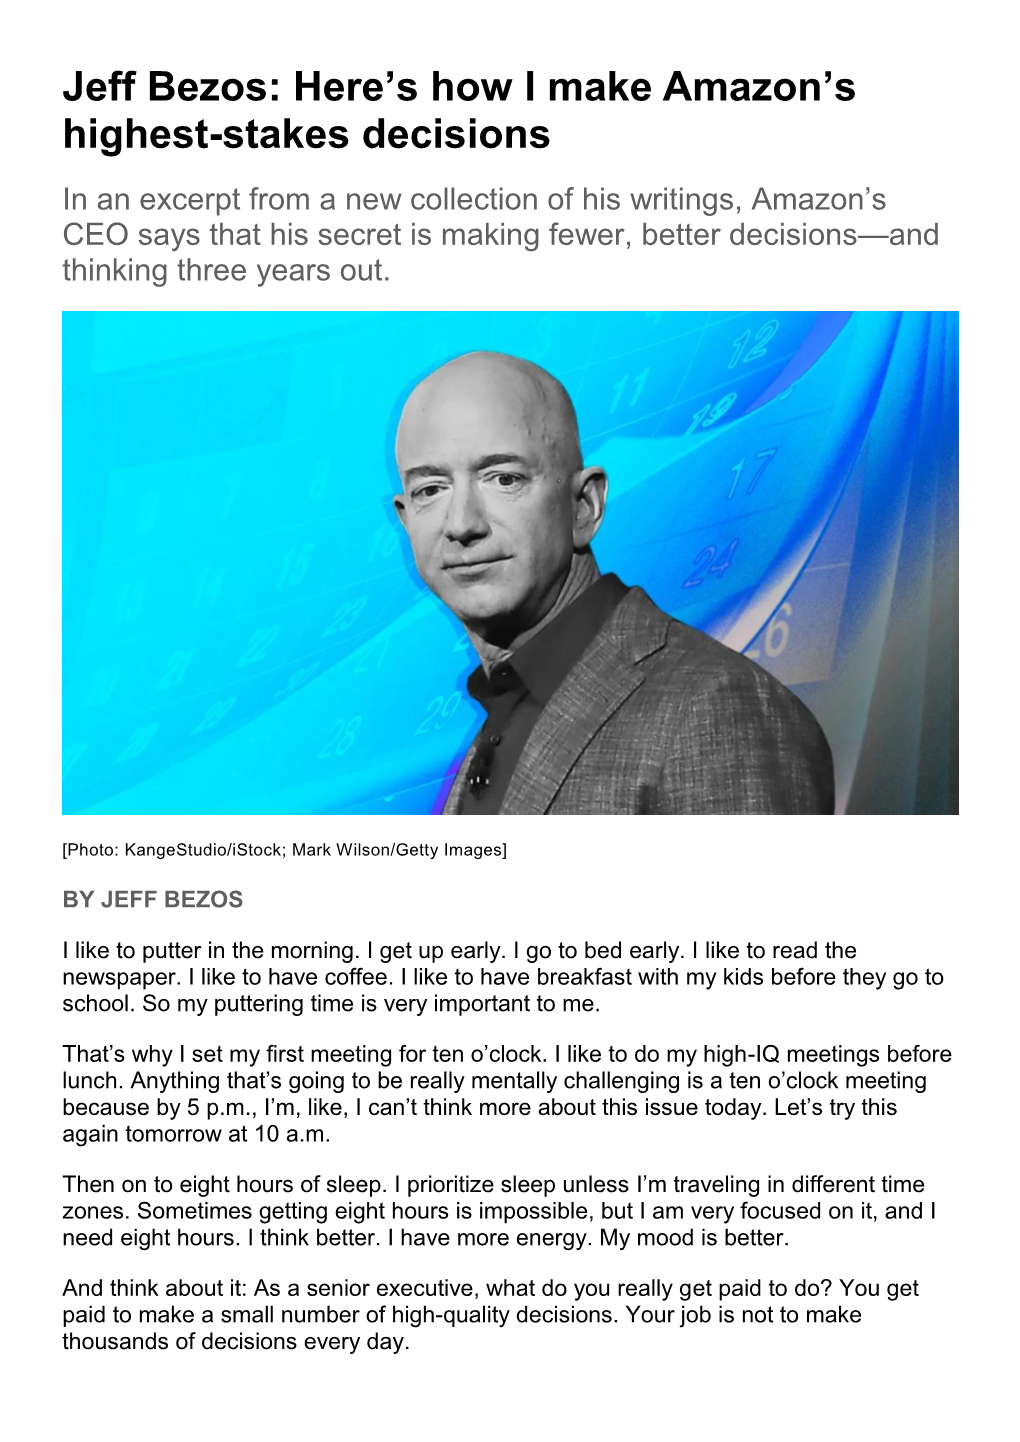 Jeff Bezos: Here's How I Make Amazon's Highest-Stakes Decisions